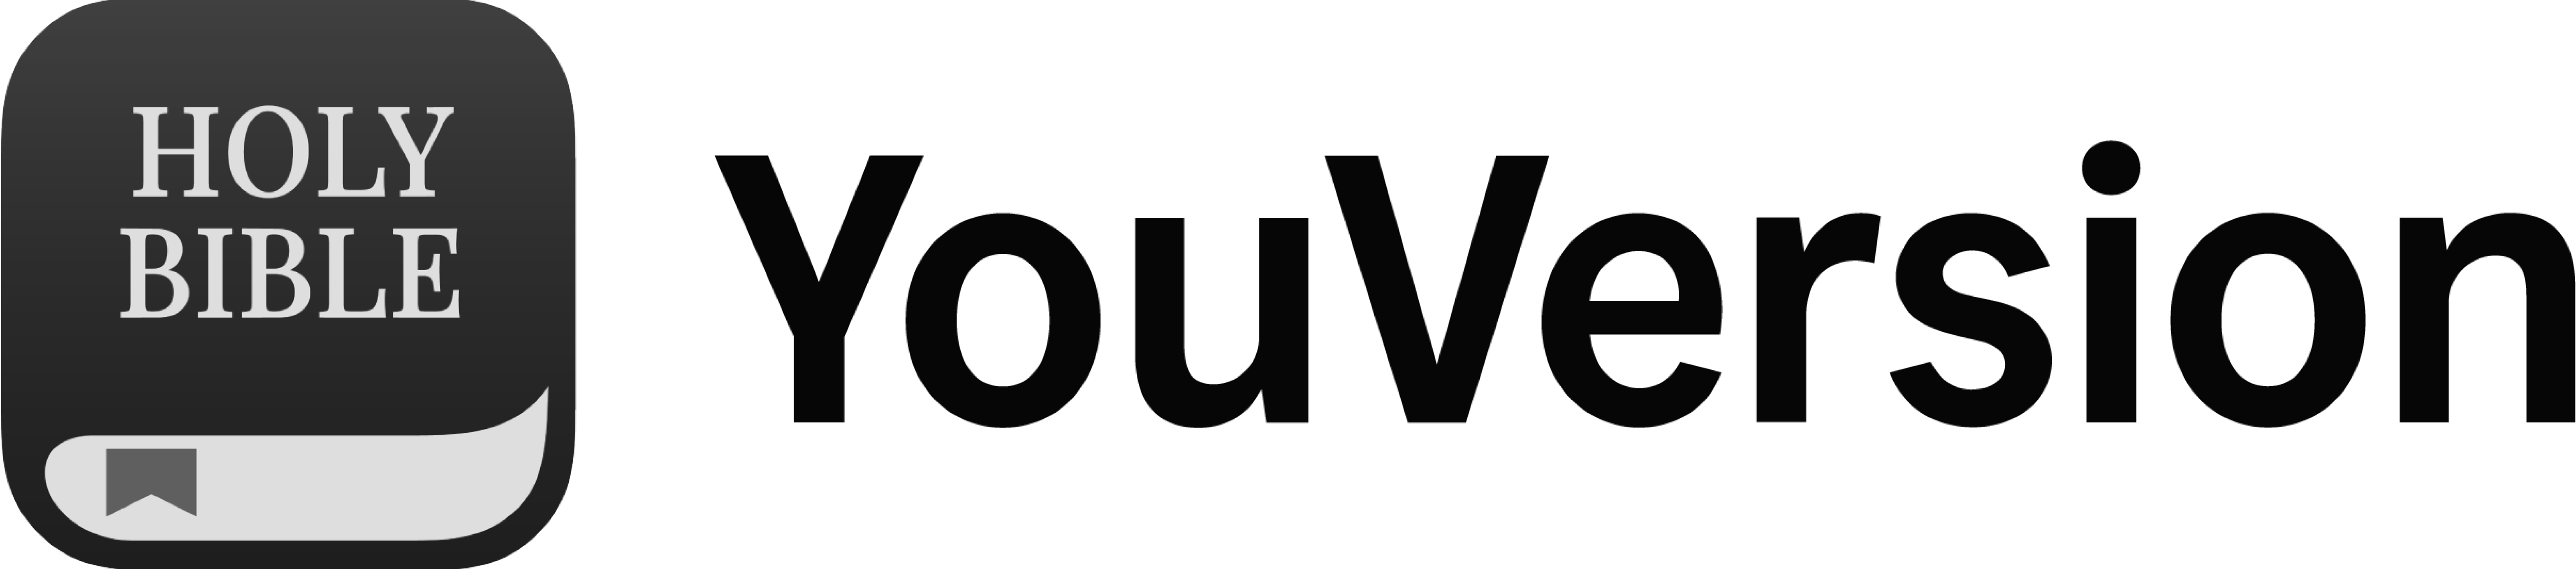 Company logo for YouVersion